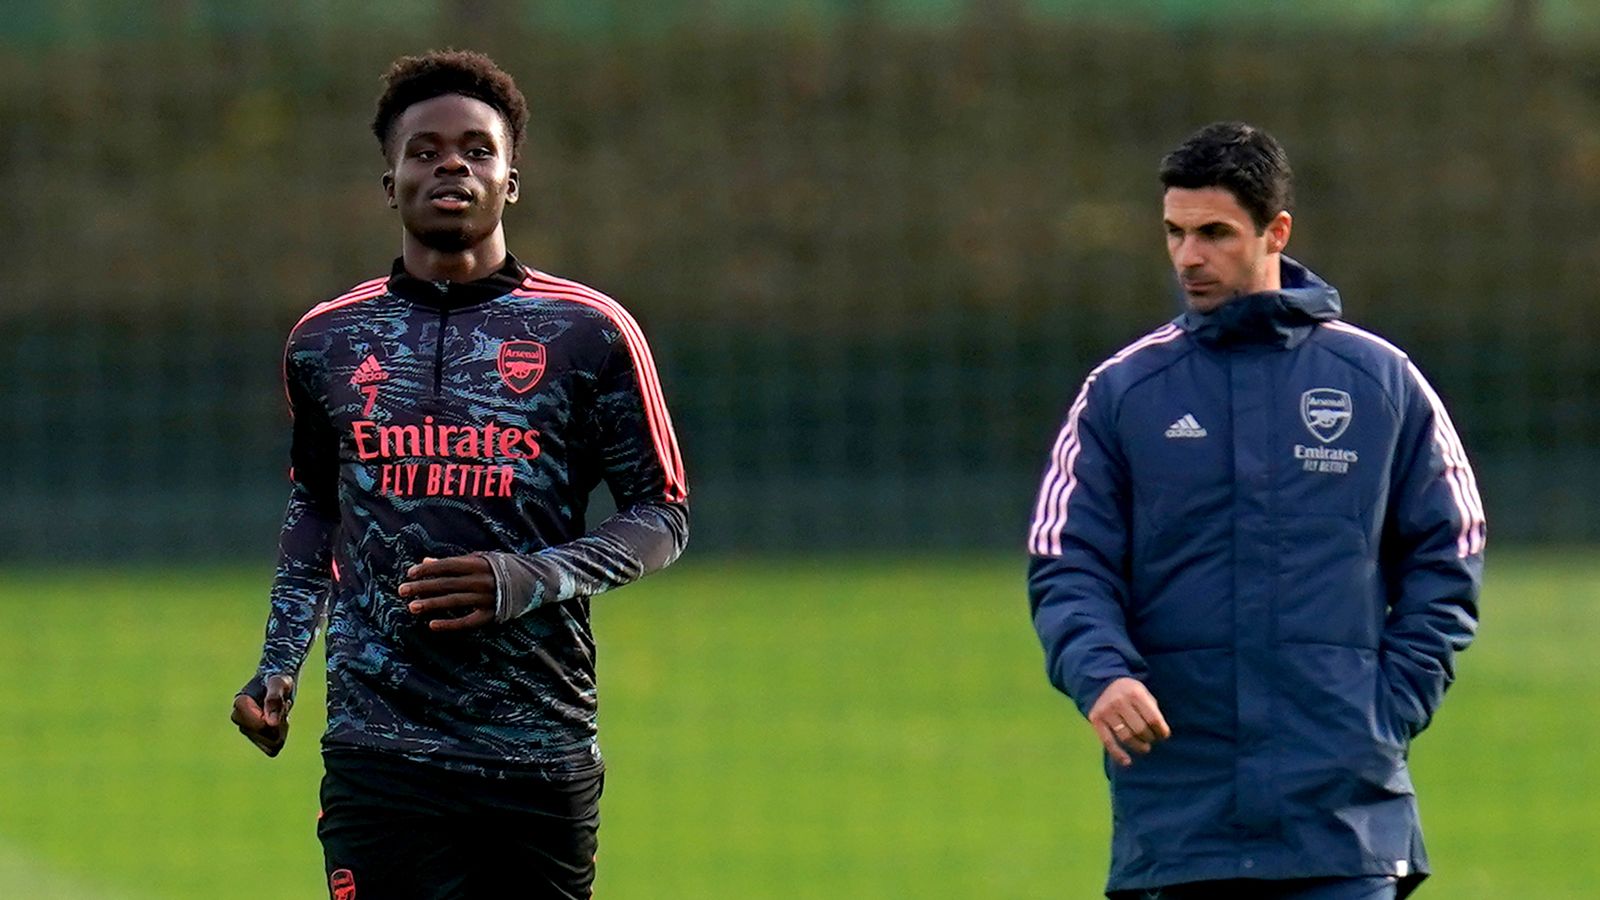 bukayo-saka-poised-for-arsenal-return-after-latest-injury-scare-as-gunners-face-fc-zurich-in-europa-league